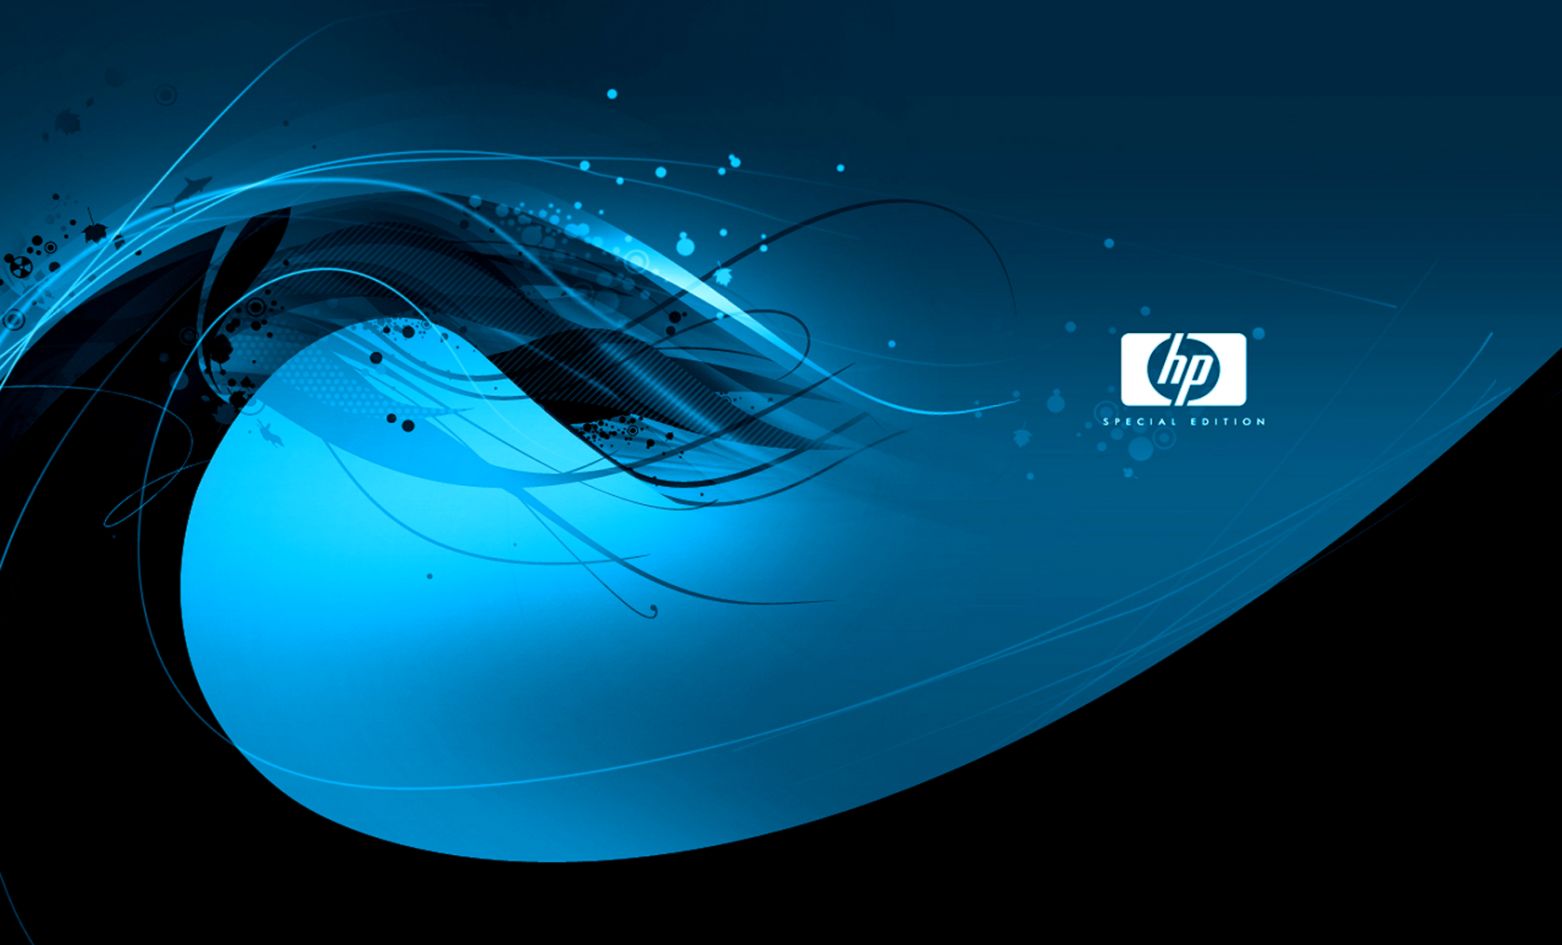 Hp Laptop Background Themes